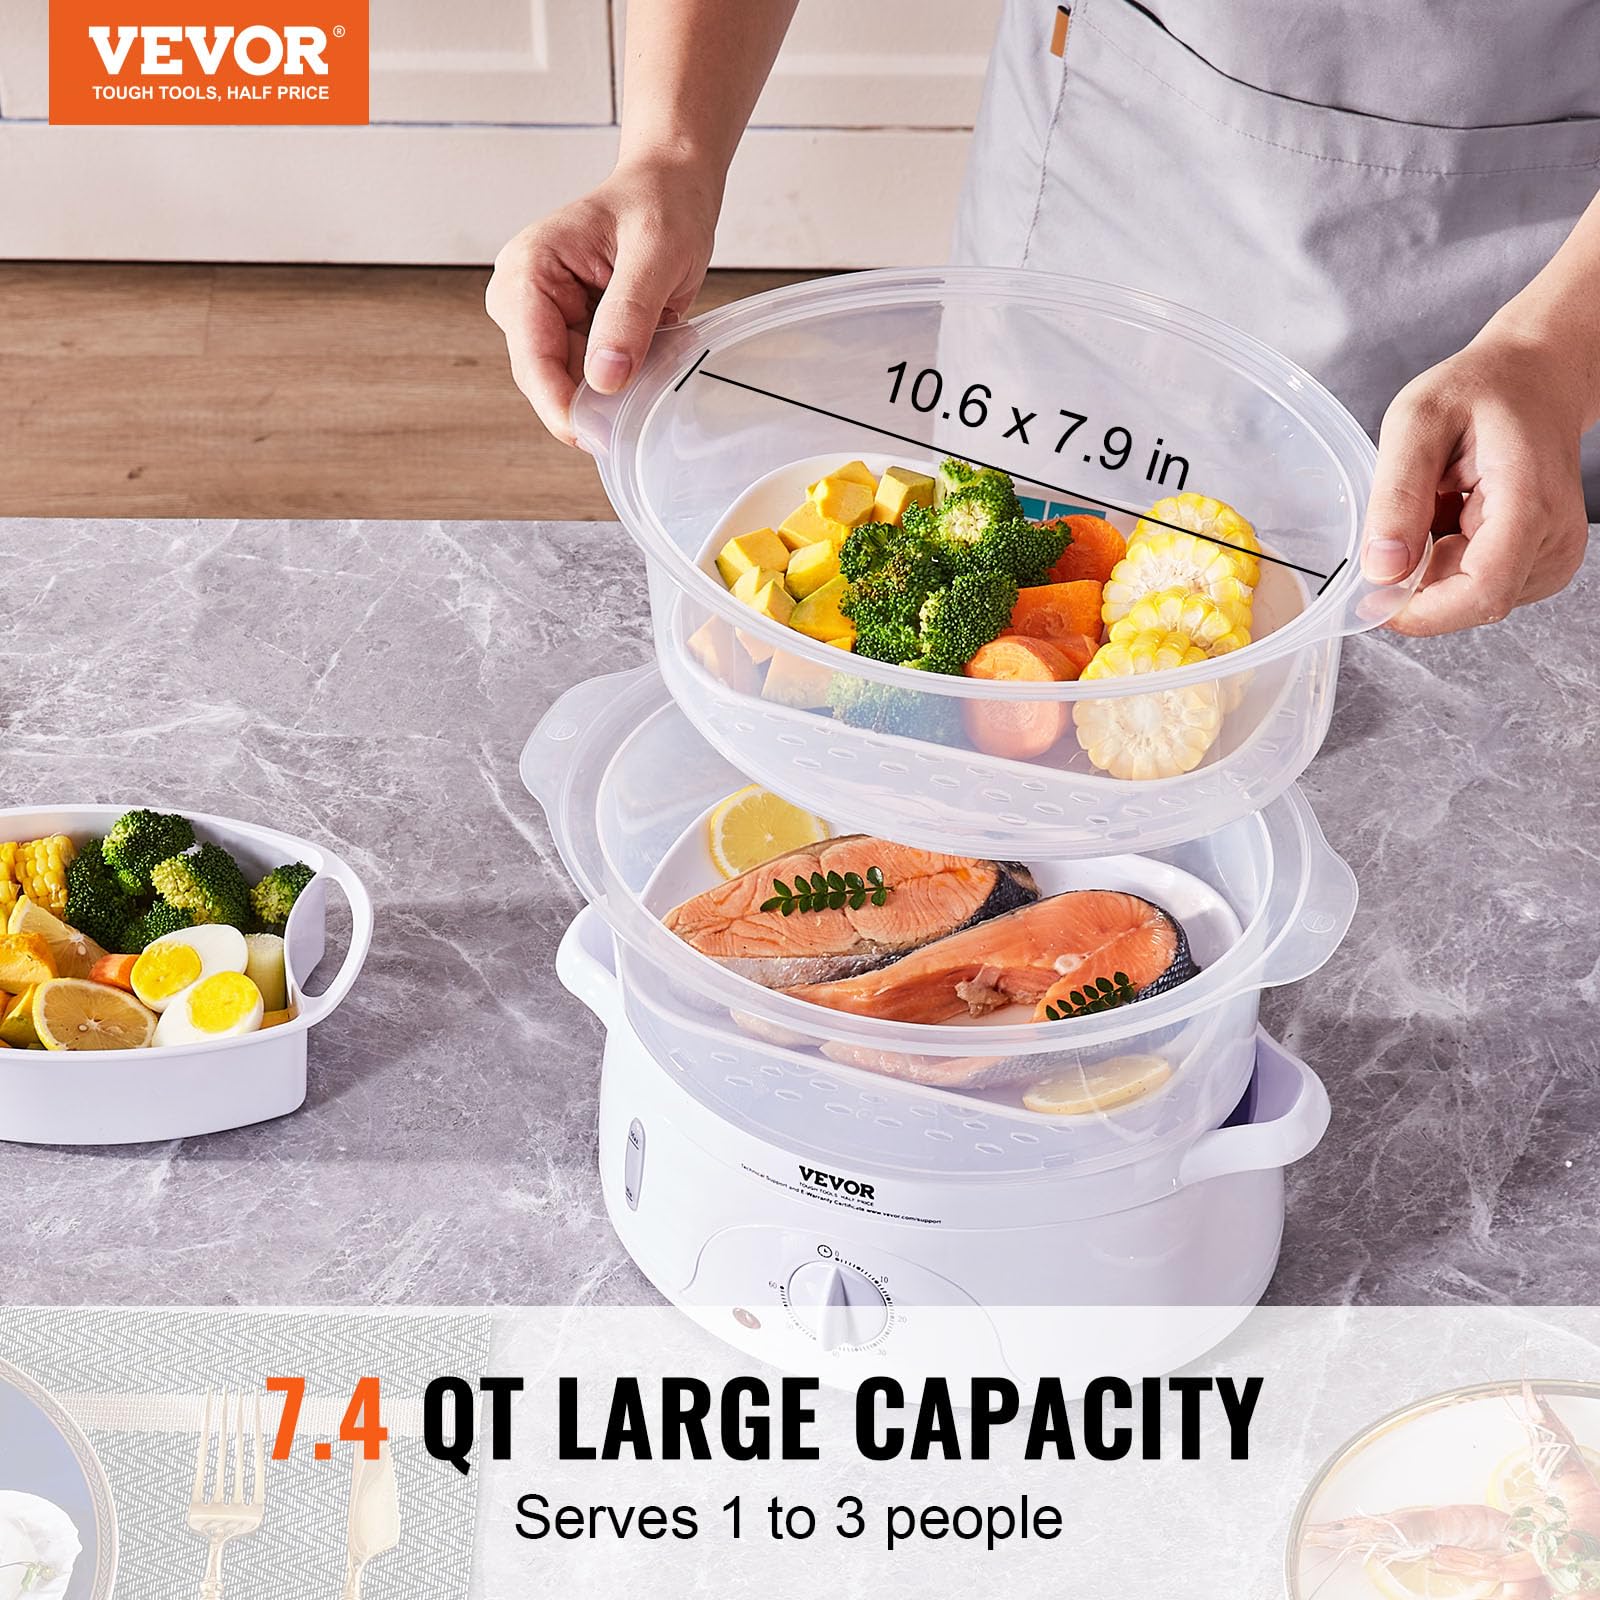 VEVOR Electric Food Streamer, 7.4Qt Electric Vegetable Steamer with 2-Tier Stackable Trays, Food-Grade Food Steamer for Cooking with 60 Min Timer, Auto Shut-Off & Boil Dry Protection (800W)…